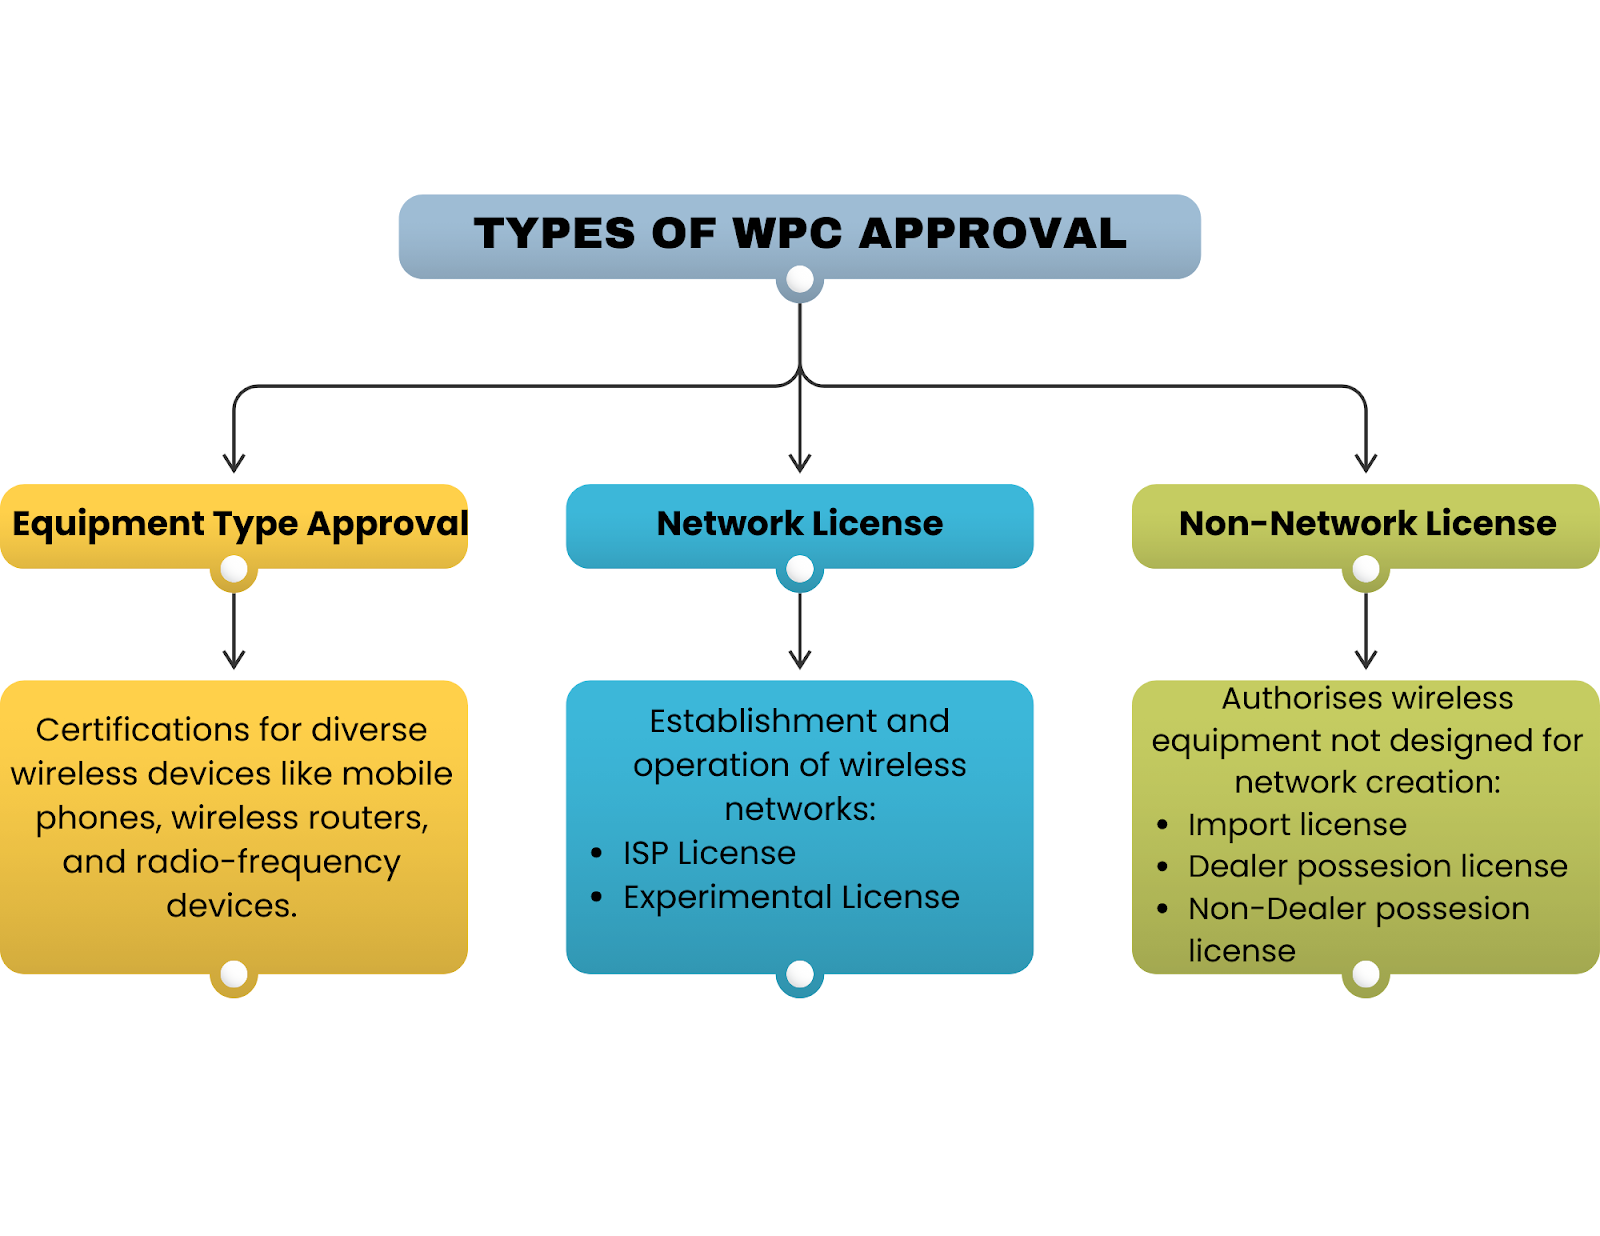 Types of WPC Approval